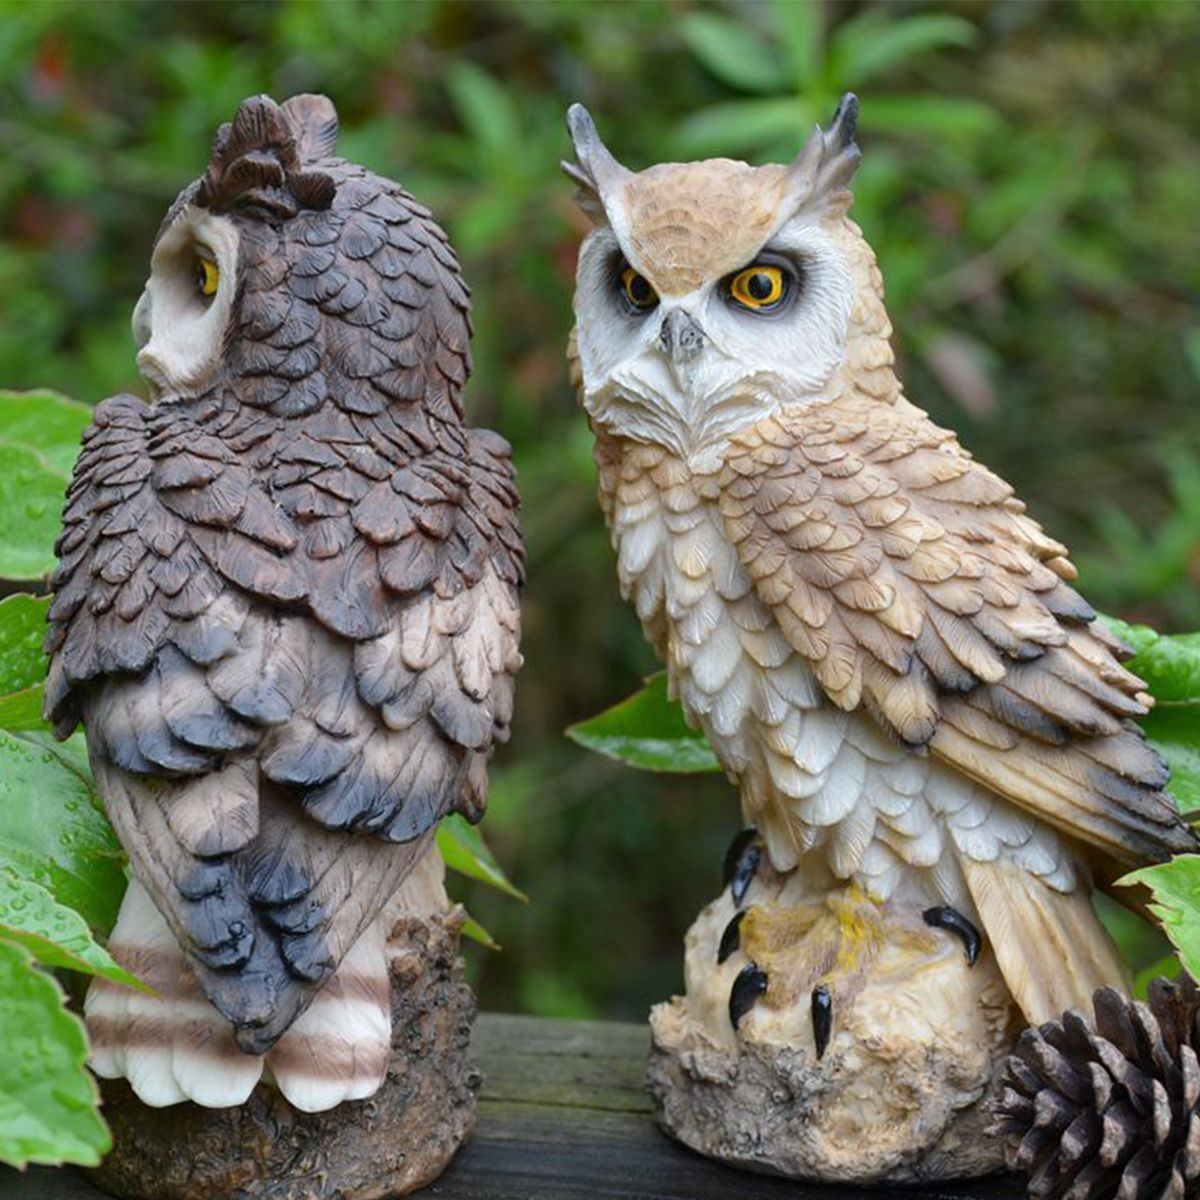 Synthetic-Resin-Owl-Outdoor-Hunting-Decoy-Garden-Yard-Landscape-Decorations-1561575